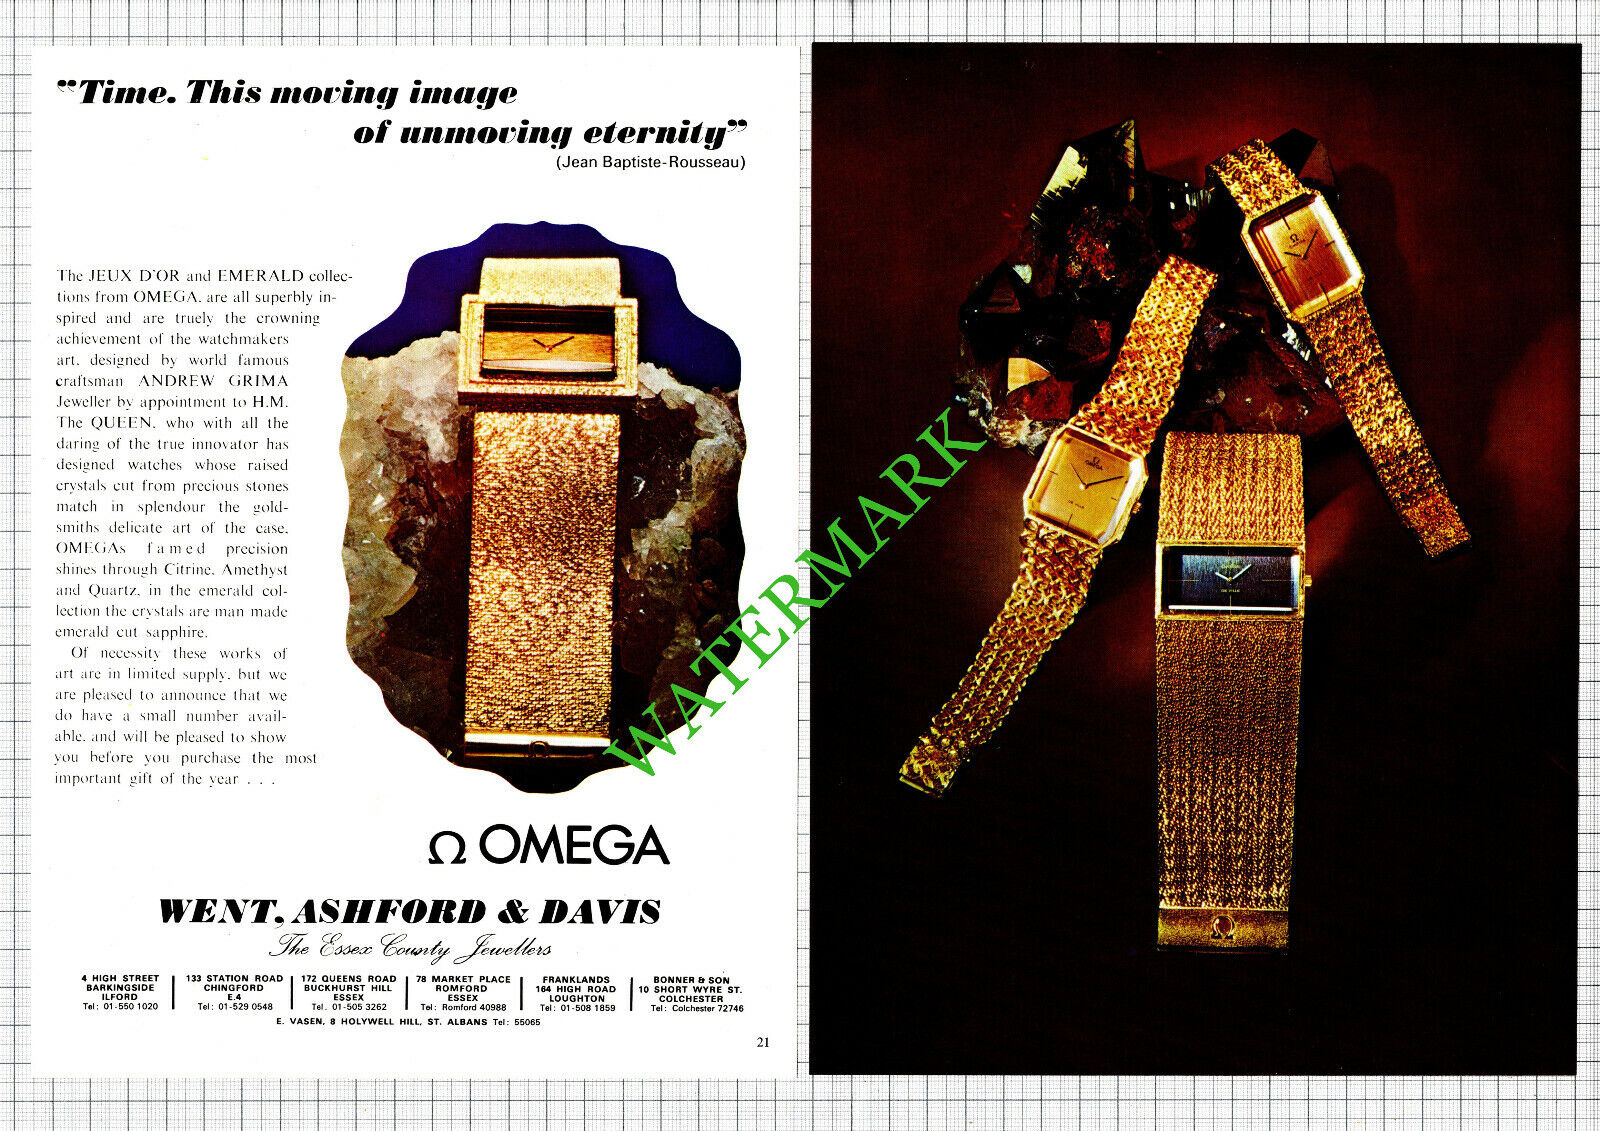 Omega Watch Andrew Grima Advert - 1973 2-Part Cutting